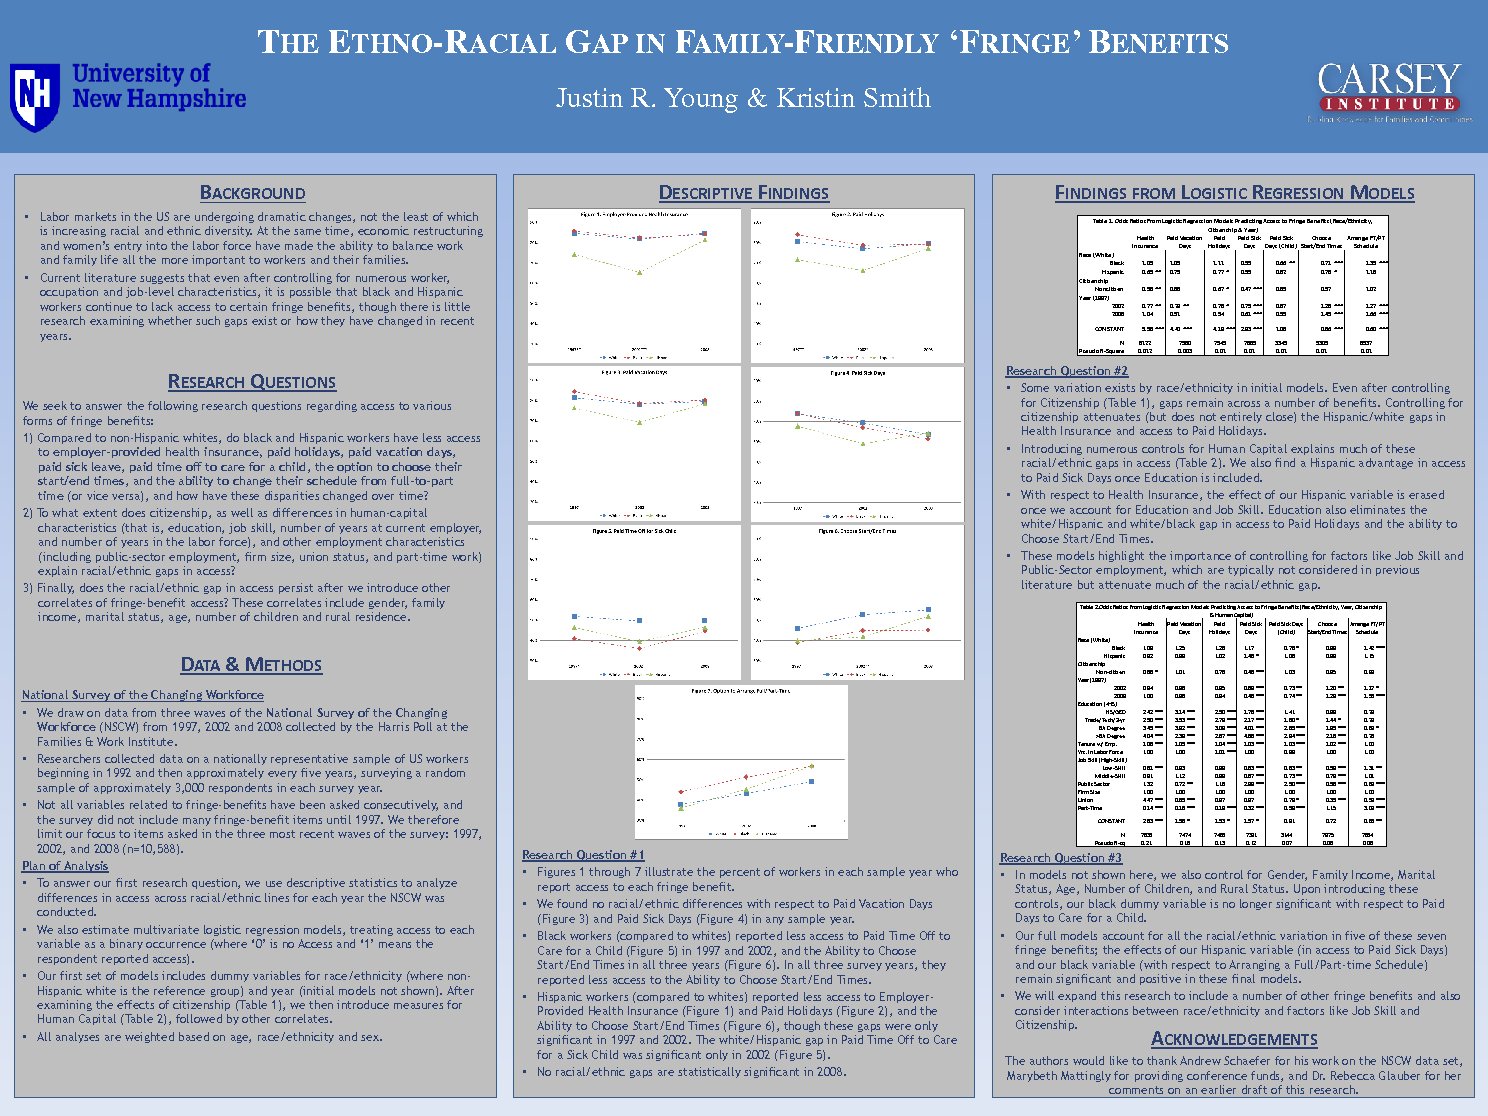 Etho-Racial Differences In Access To Family-Friendly 'Fringe' Benefits by jrobertyoung